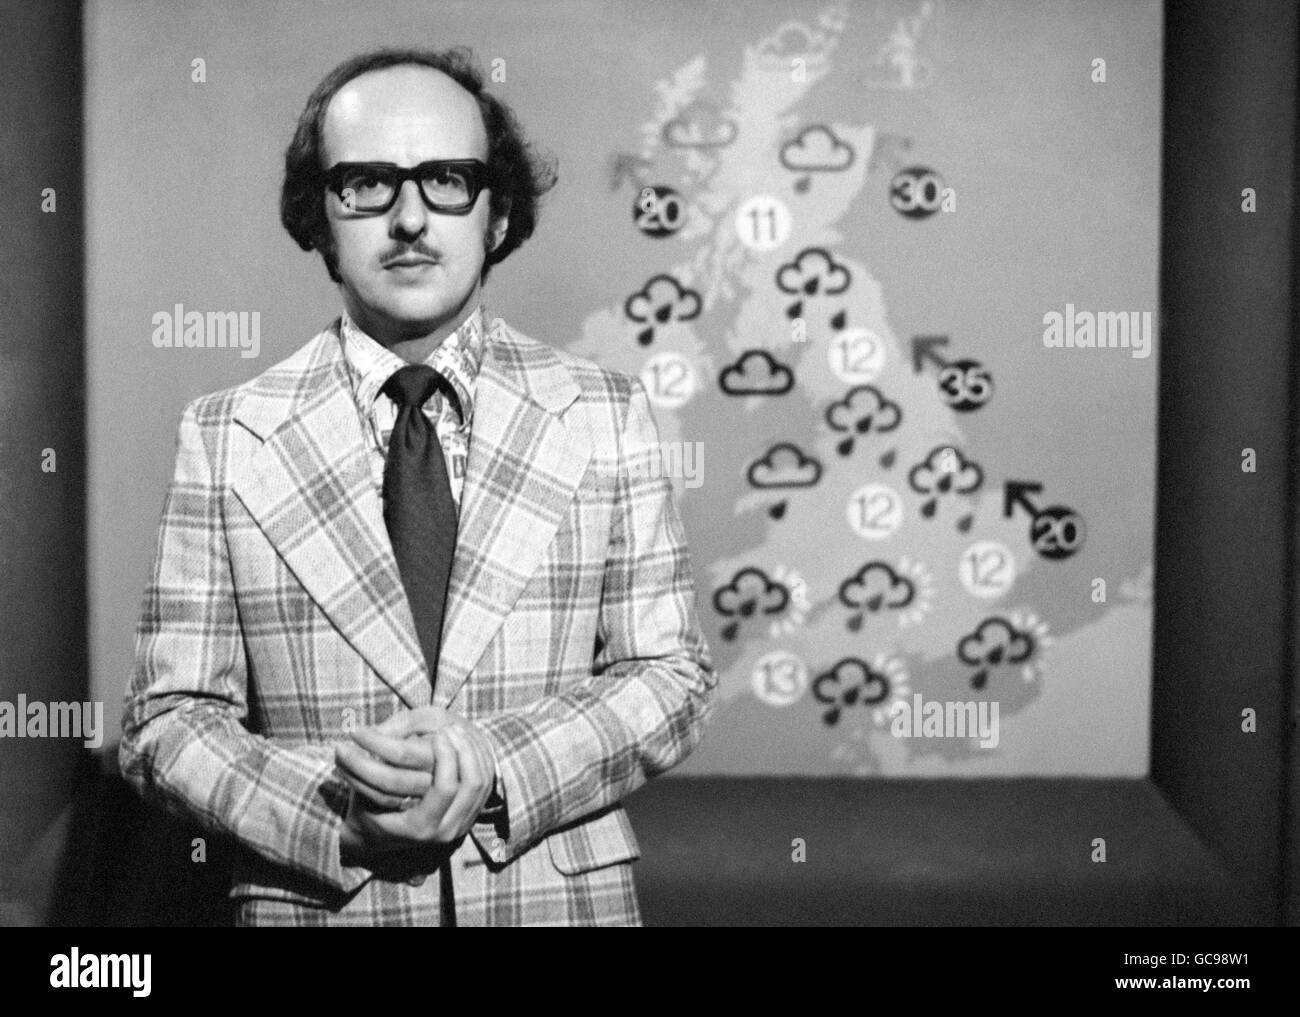 WEATHERMAN MICHAEL FISH AS HE LOOKED WHEN HE MADE HIS 1ST TELEVISION APPEARANCE 20 YEARS AGO. A PROGRAMME MARKING 40 YEARS OF WEATHER FORECAST TRANSMISSIONS WILL BE SHOWN ON BBC1. Stock Photo